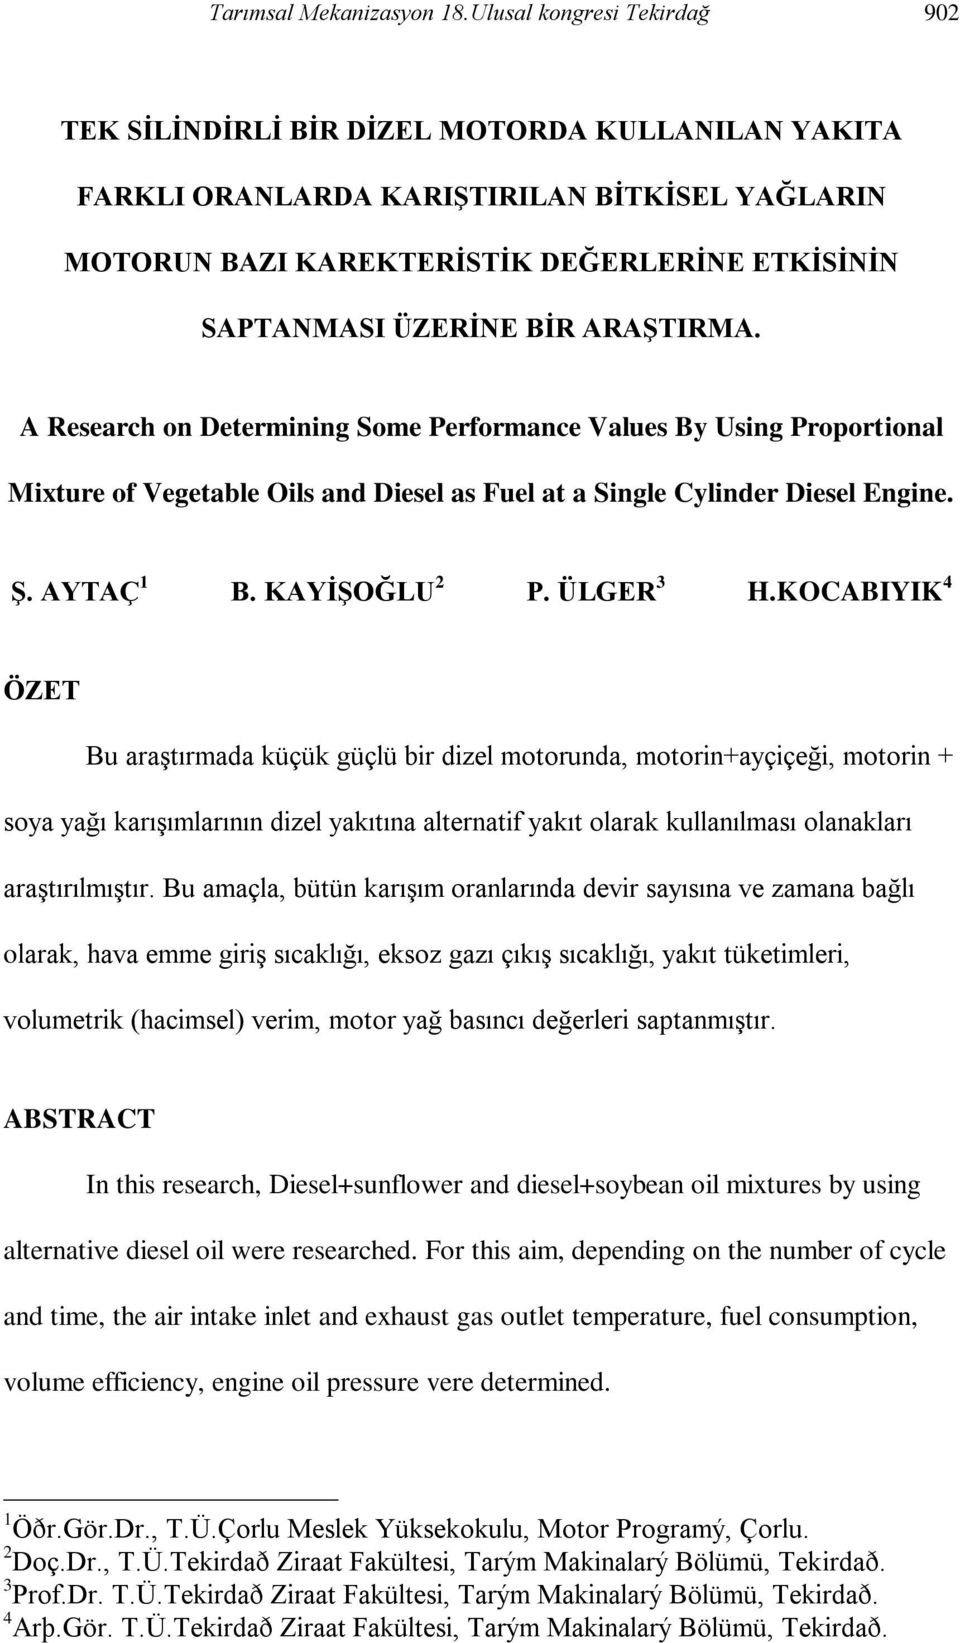 ARAġTIRMA. A Research on Determining Some Performance Values By Using Proportional Mixture of Vegetable Oils and Diesel as Fuel at a Single Cylinder Diesel Engine. ġ. AYTAÇ 1 B. KAYĠġOĞLU 2 P.